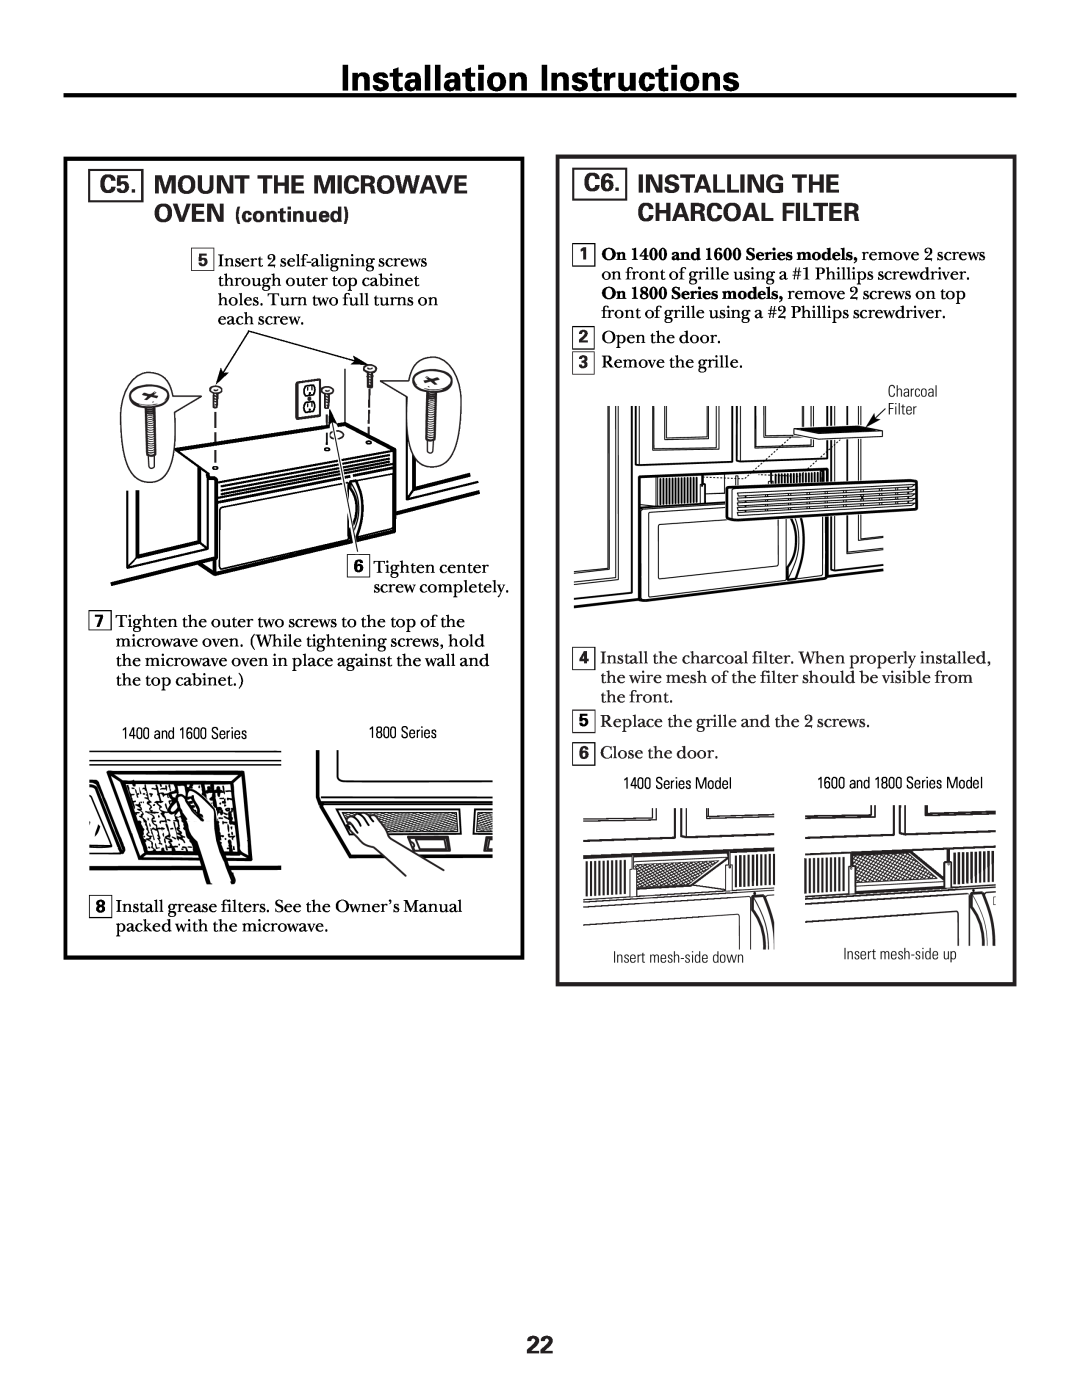 GE Over the Range Microwave Oven manual C5. MOUNT THE MICROWAVE, C6. INSTALLING THE CHARCOAL FILTER, OVEN continued 